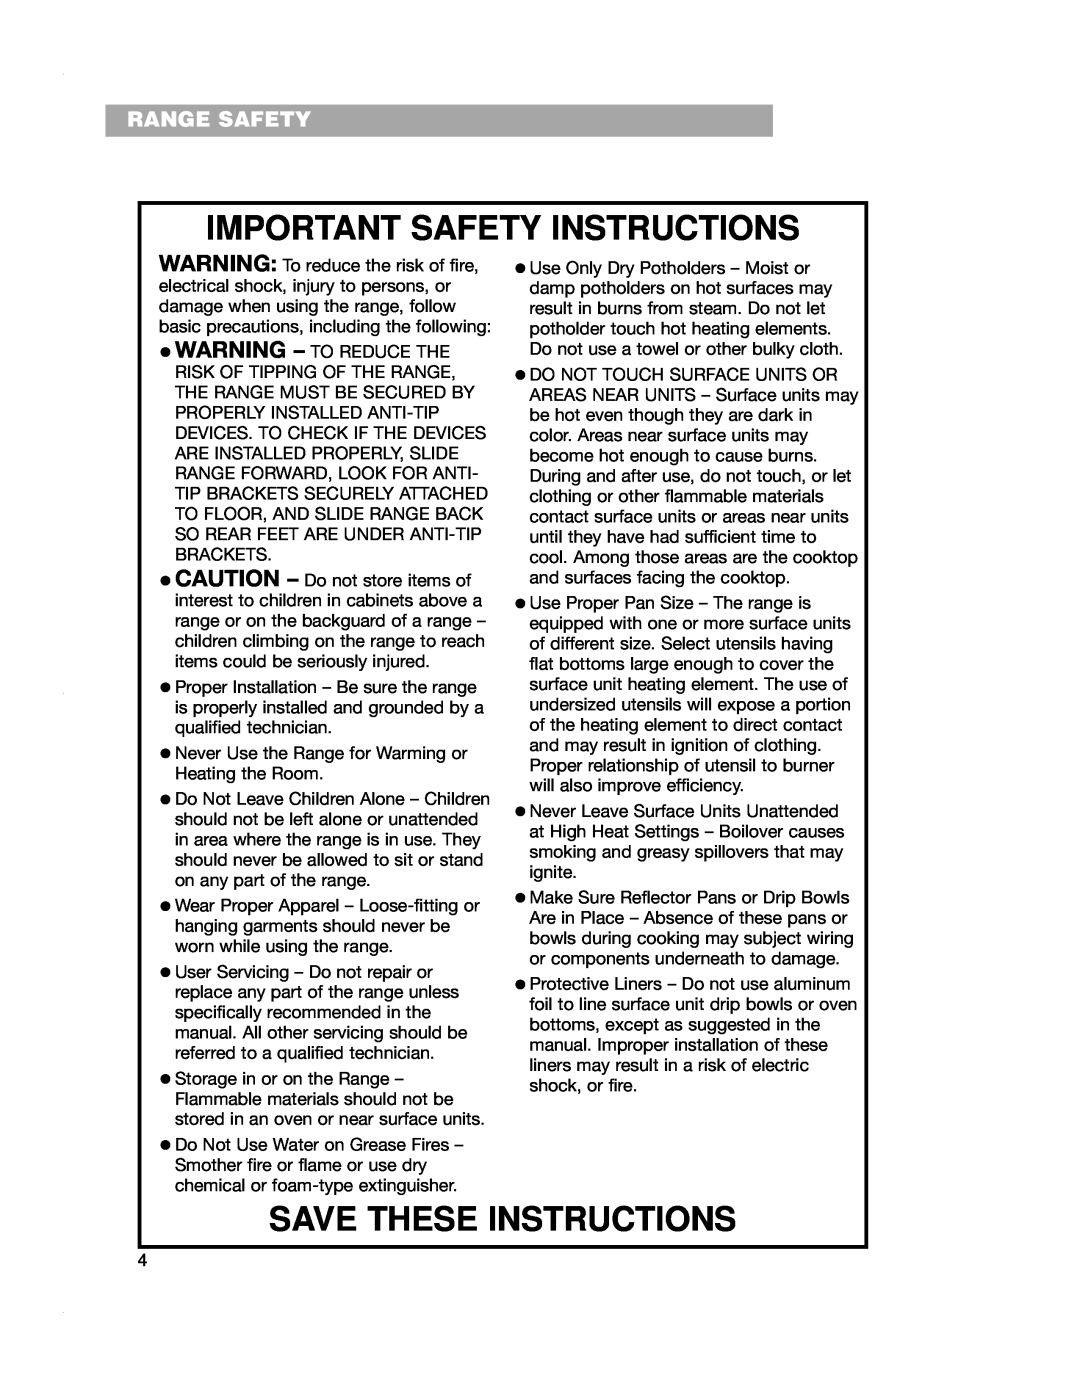 Whirlpool RF4700XE warranty Important Safety Instructions, Save These Instructions, Range Safety 